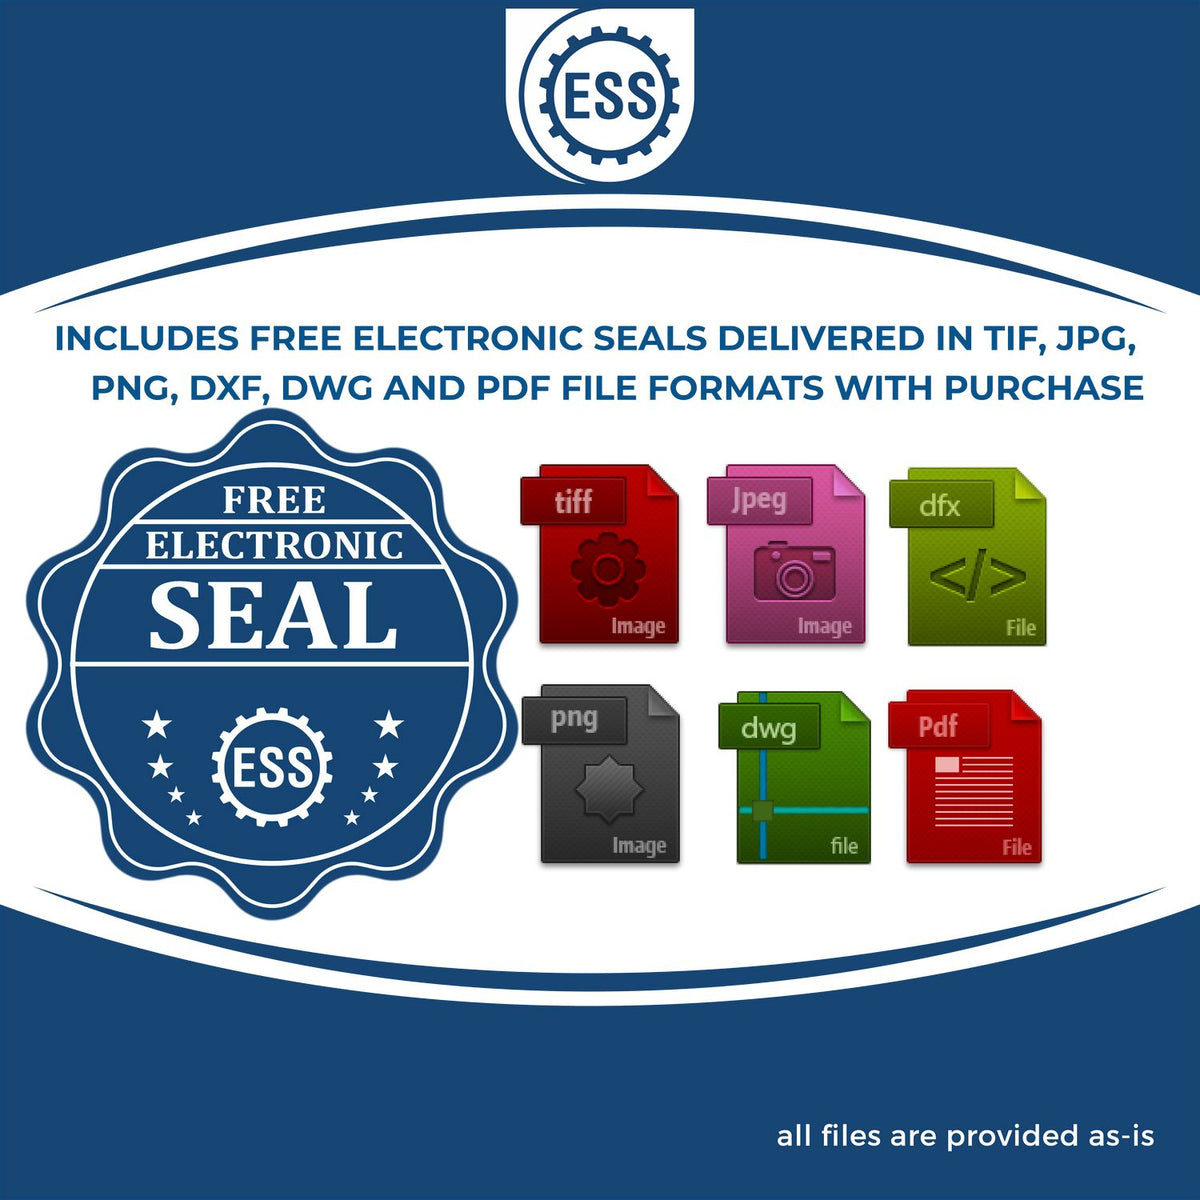 An infographic for the free electronic seal for the Montana Geologist Desk Seal illustrating the different file type icons such as DXF, DWG, TIF, JPG and PNG.